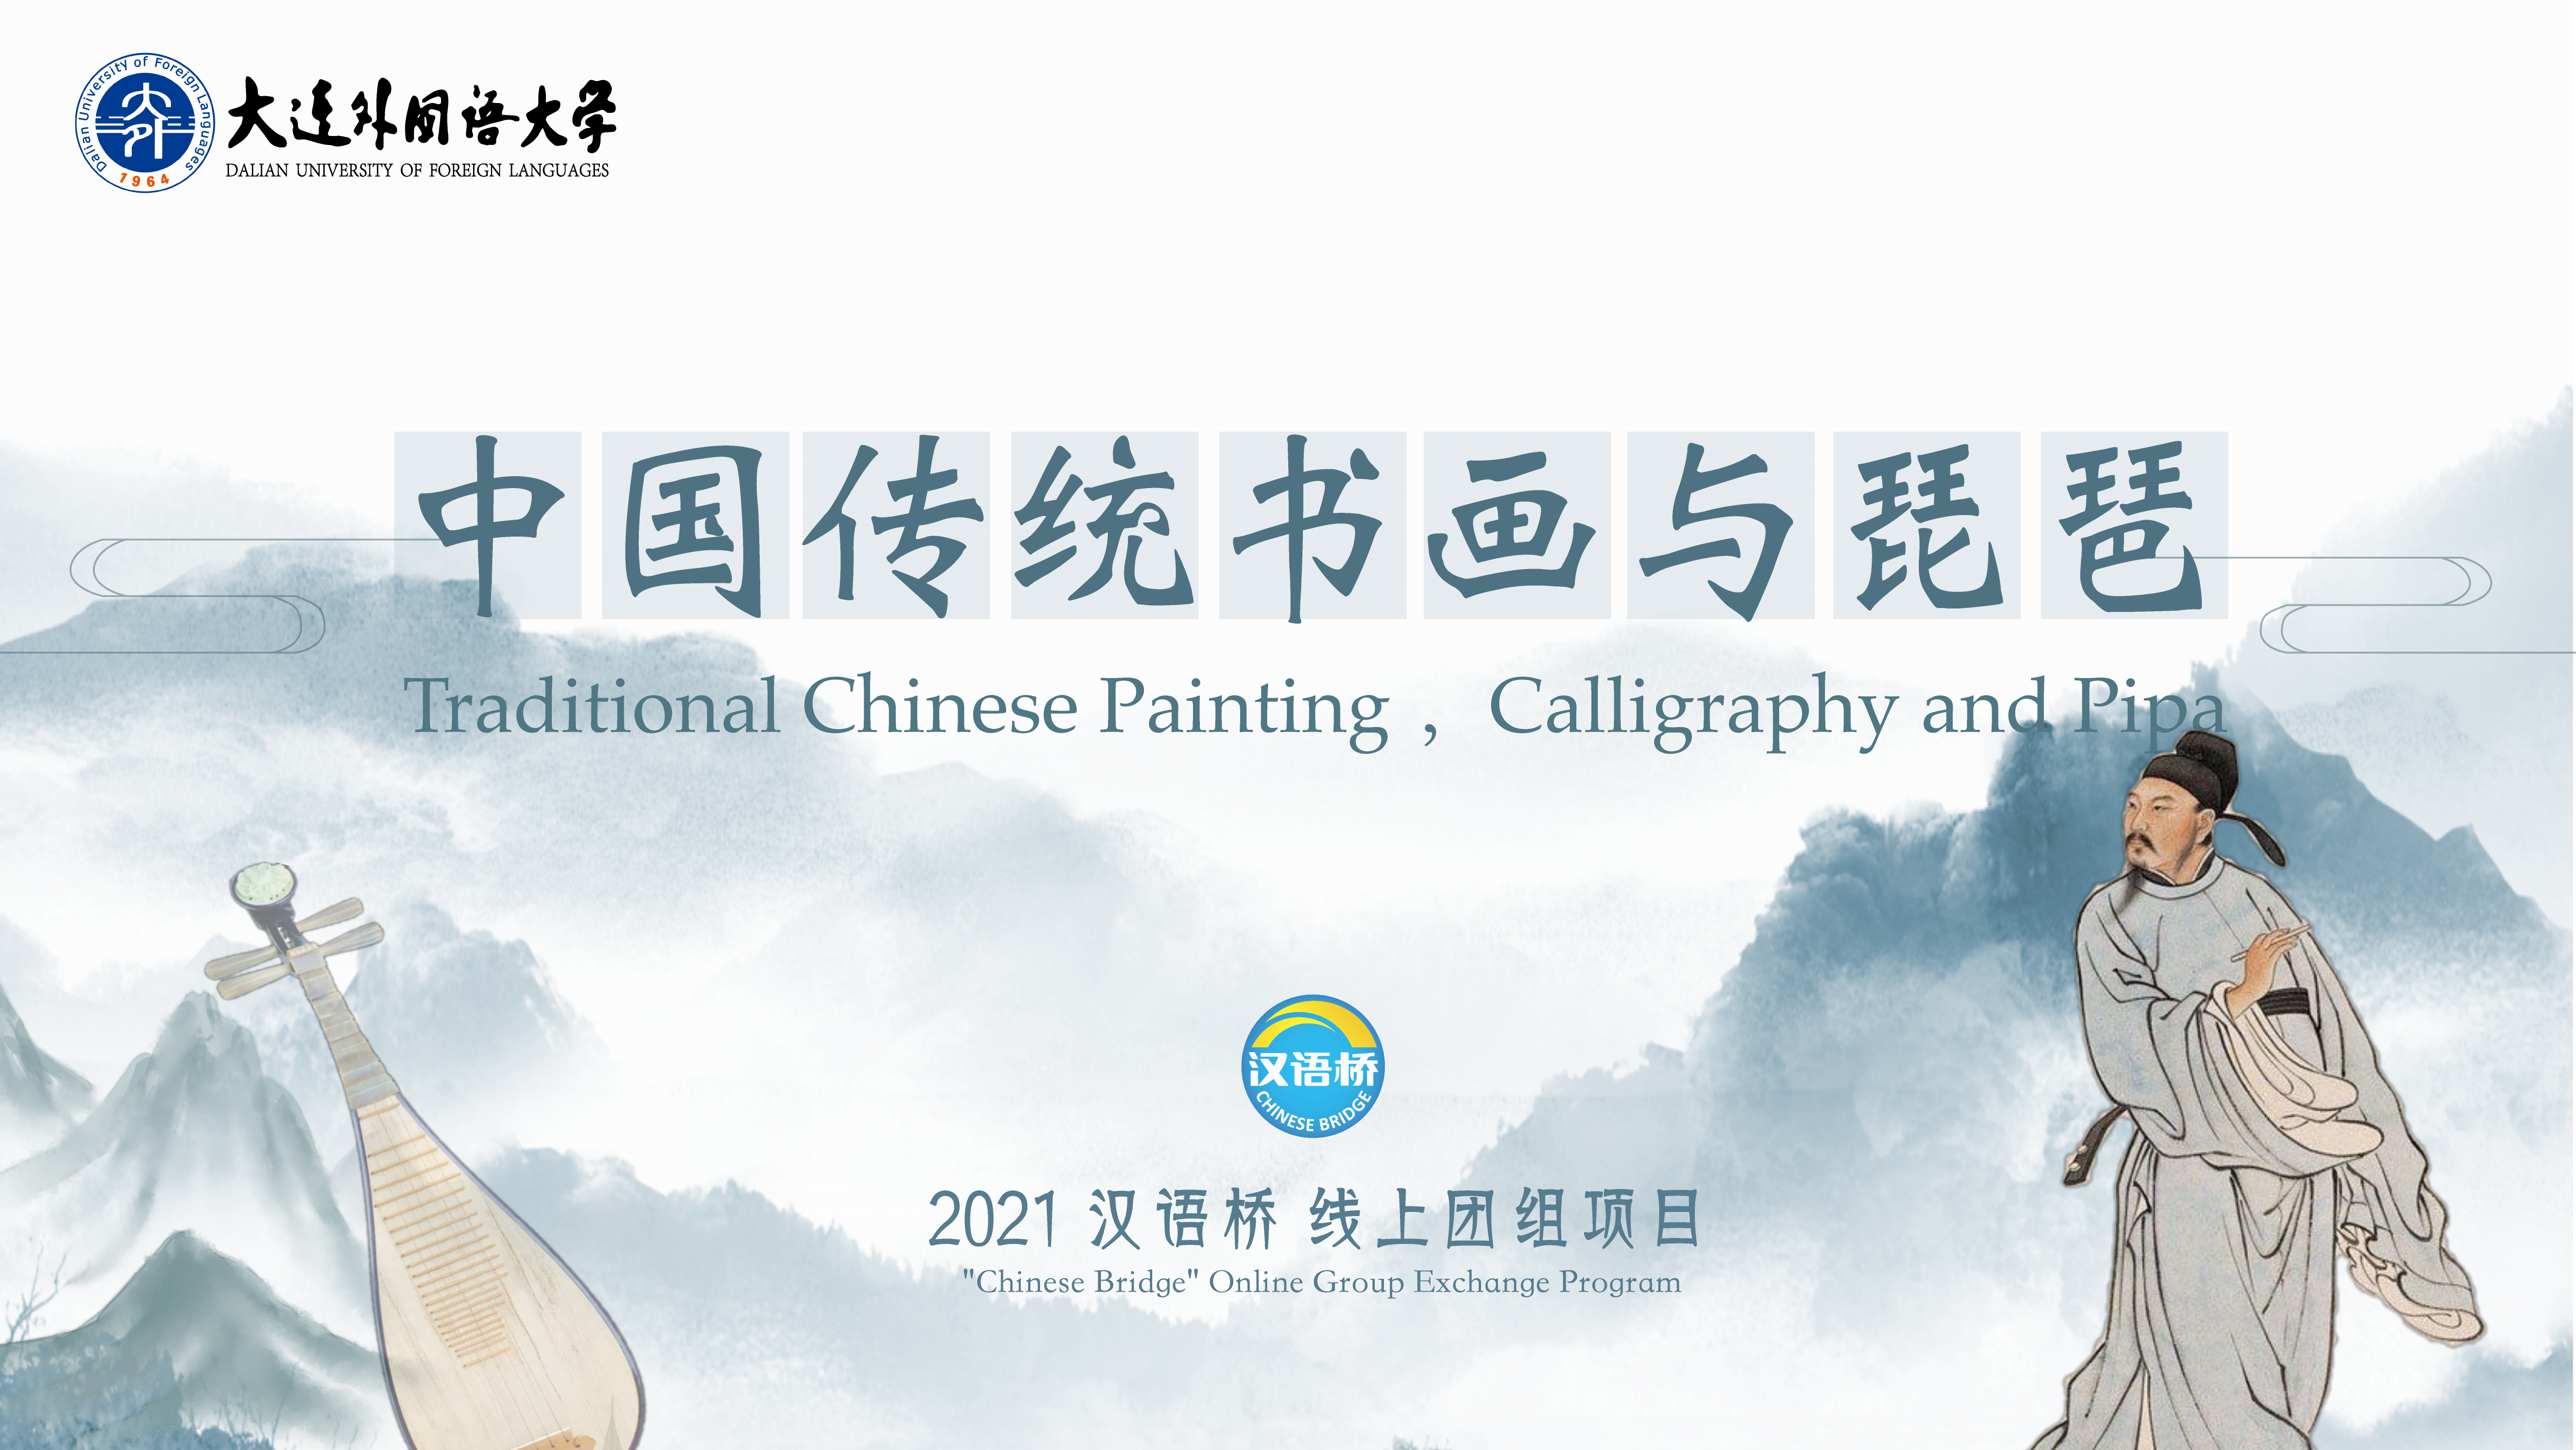 Traditional Chinese Painting ，Calligraphy and Pipa